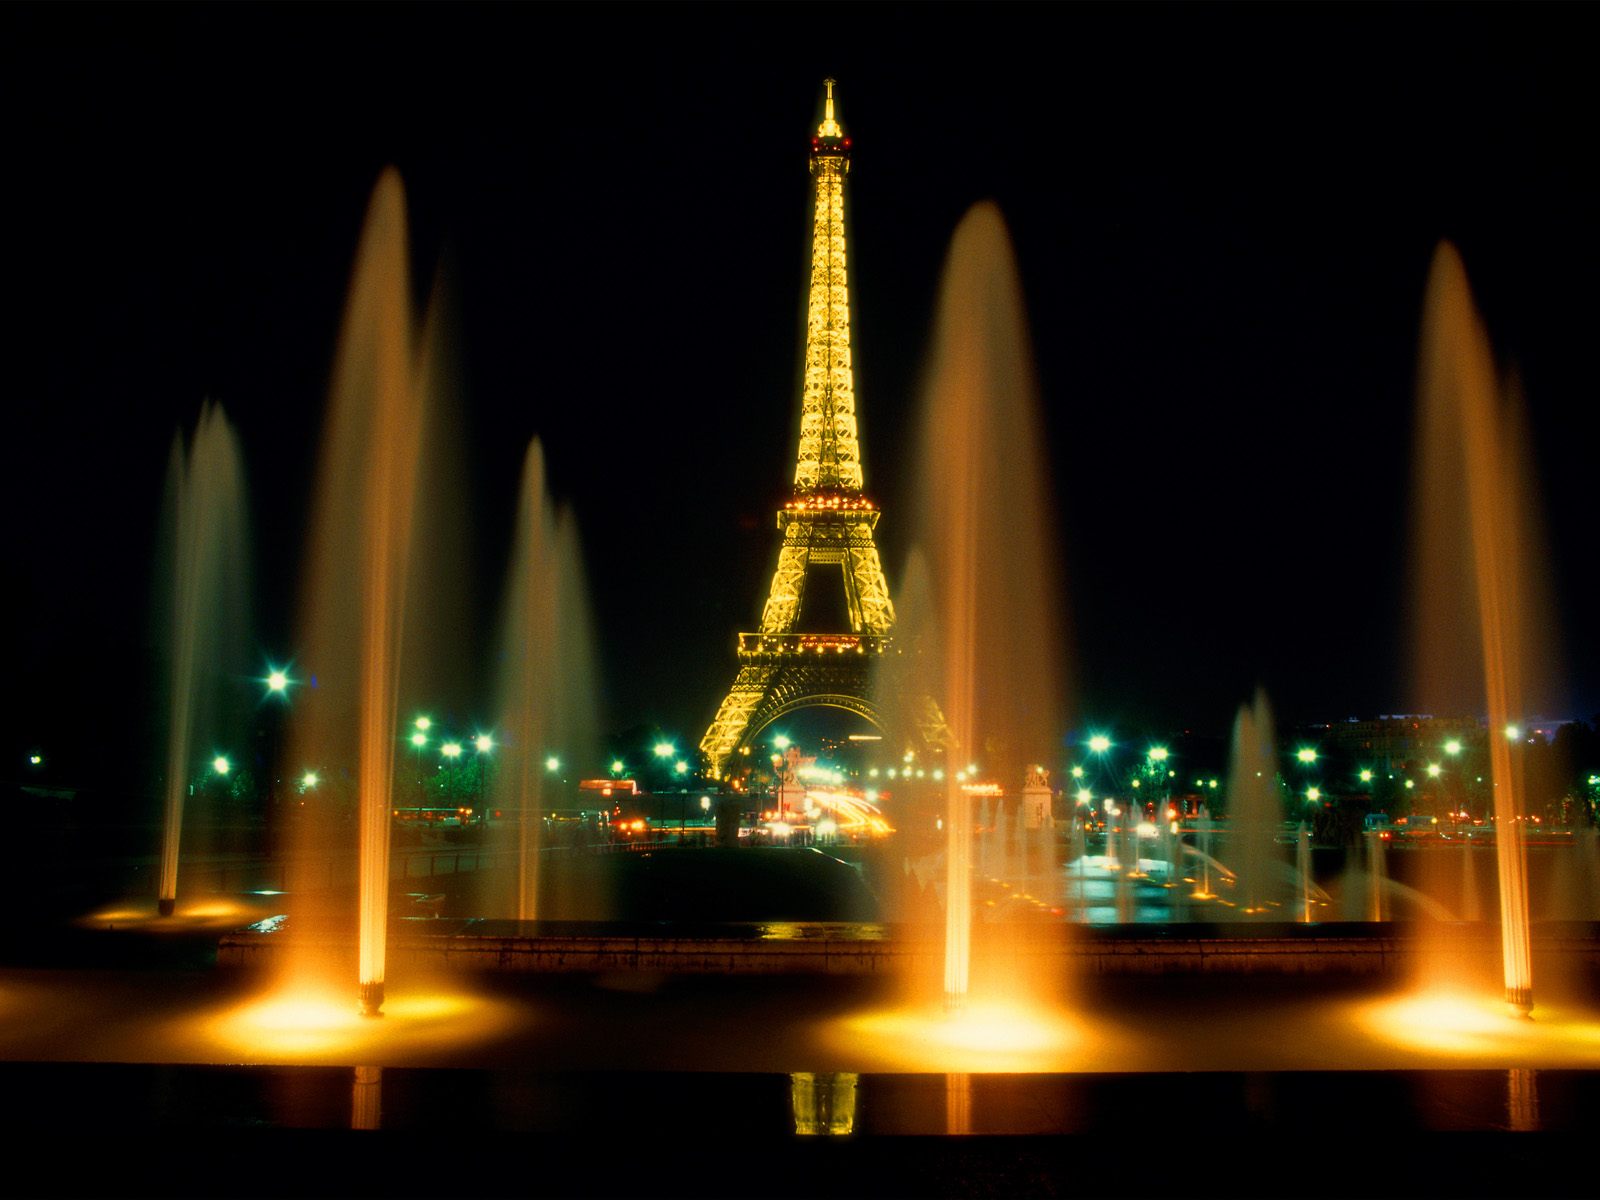 Glowing Eiffel tower and fountains at night